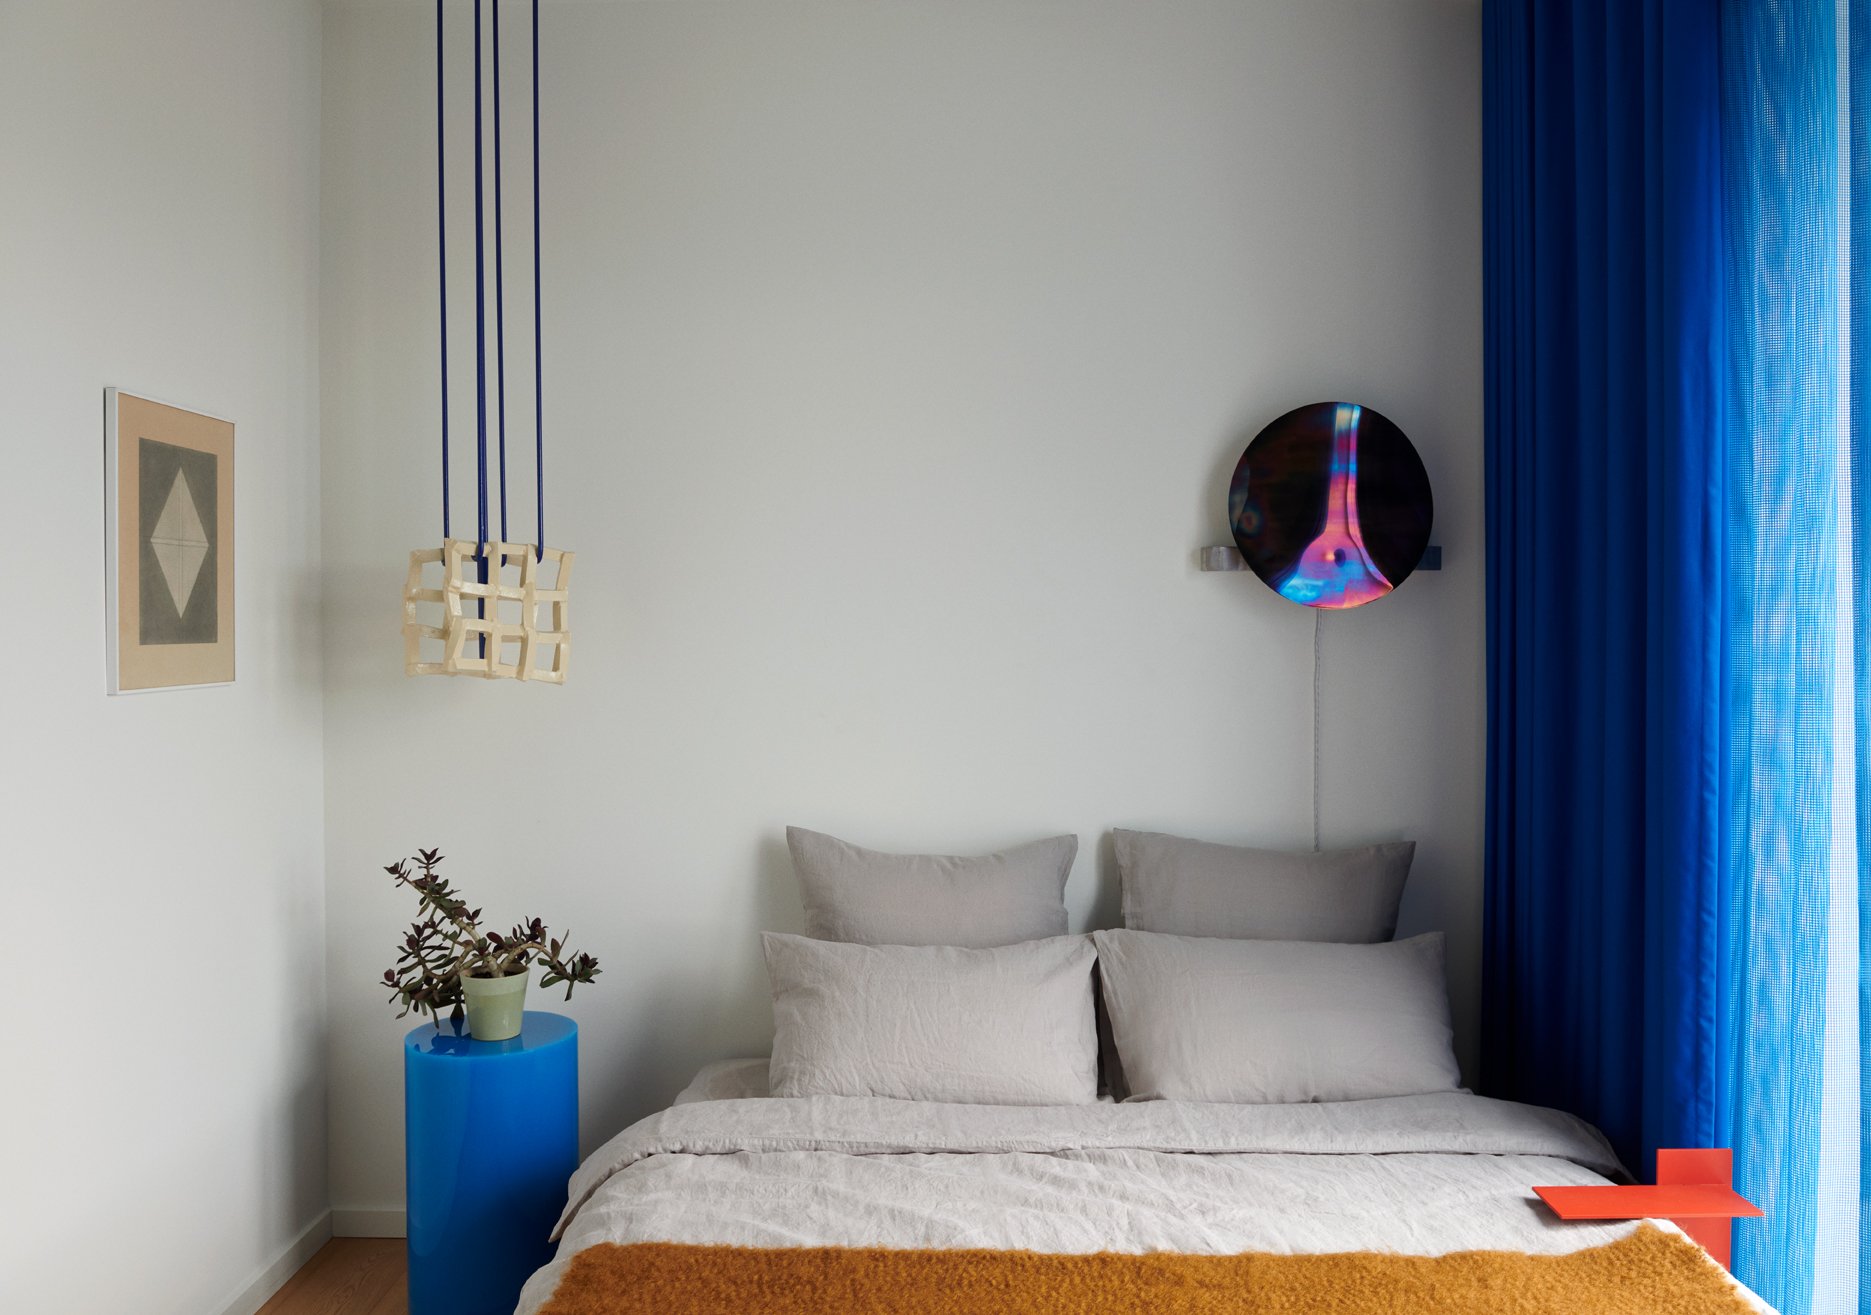  The main bedroom includes a ‘Foam Catcher’ pendant light, ‘Self Reflect’ wall sconce, and orange powder-coated-steel side table, all by Denys. A pencil drawing by Belgian artist Dan van Severen overlooks a ‘Candy Column’ side table by Sabine Marceli